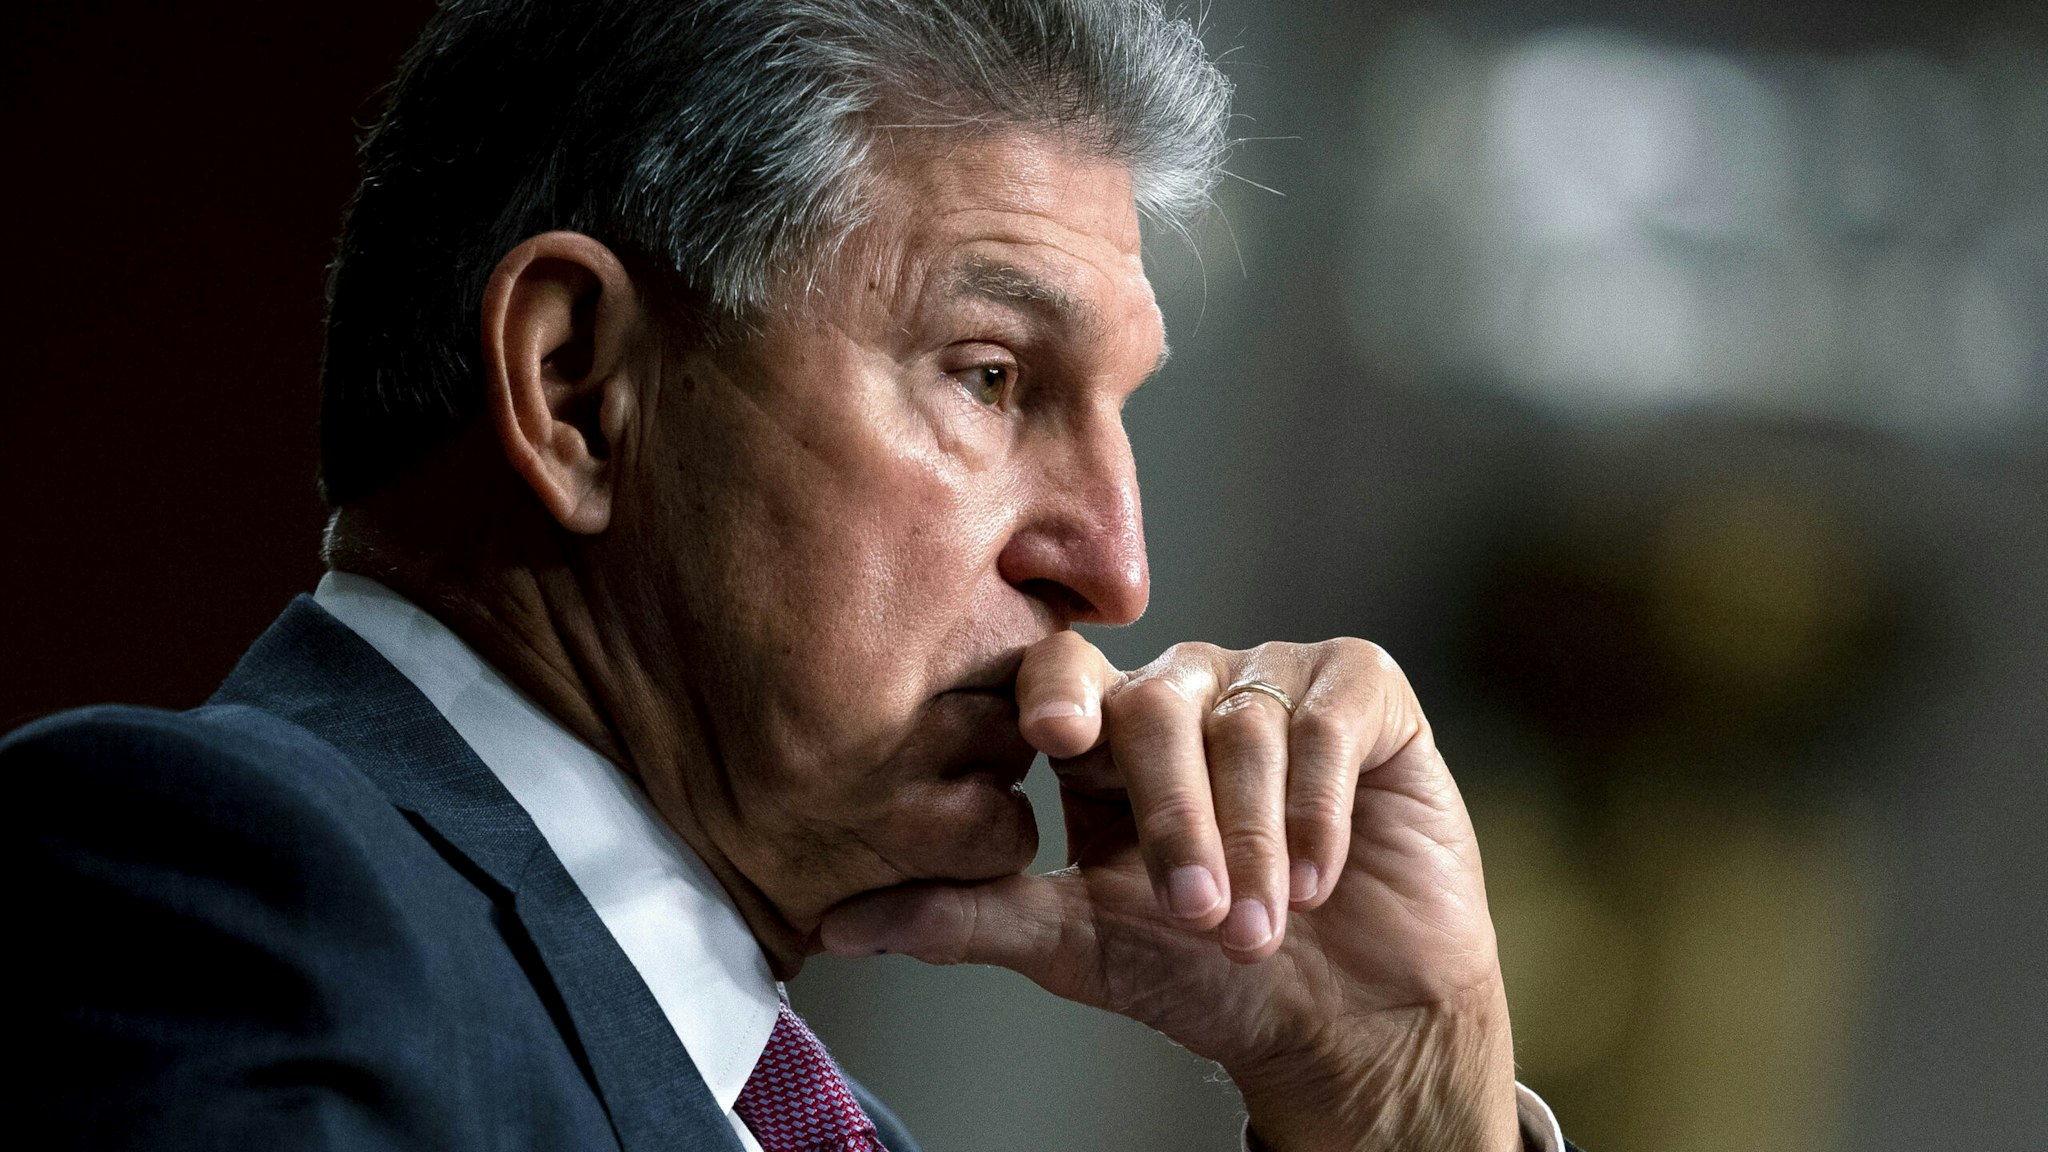 WASHINGTON, DC - SEPTEMBER 28: Sen. Joe Manchin (D-WV) pauses during a Senate Armed Services Committee hearing on the conclusion of military operations in Afghanistan and plans for future counterterrorism operations at the Dirksen Senate Office building on Capitol Hill on September 28, 2021 in Washington, DC.